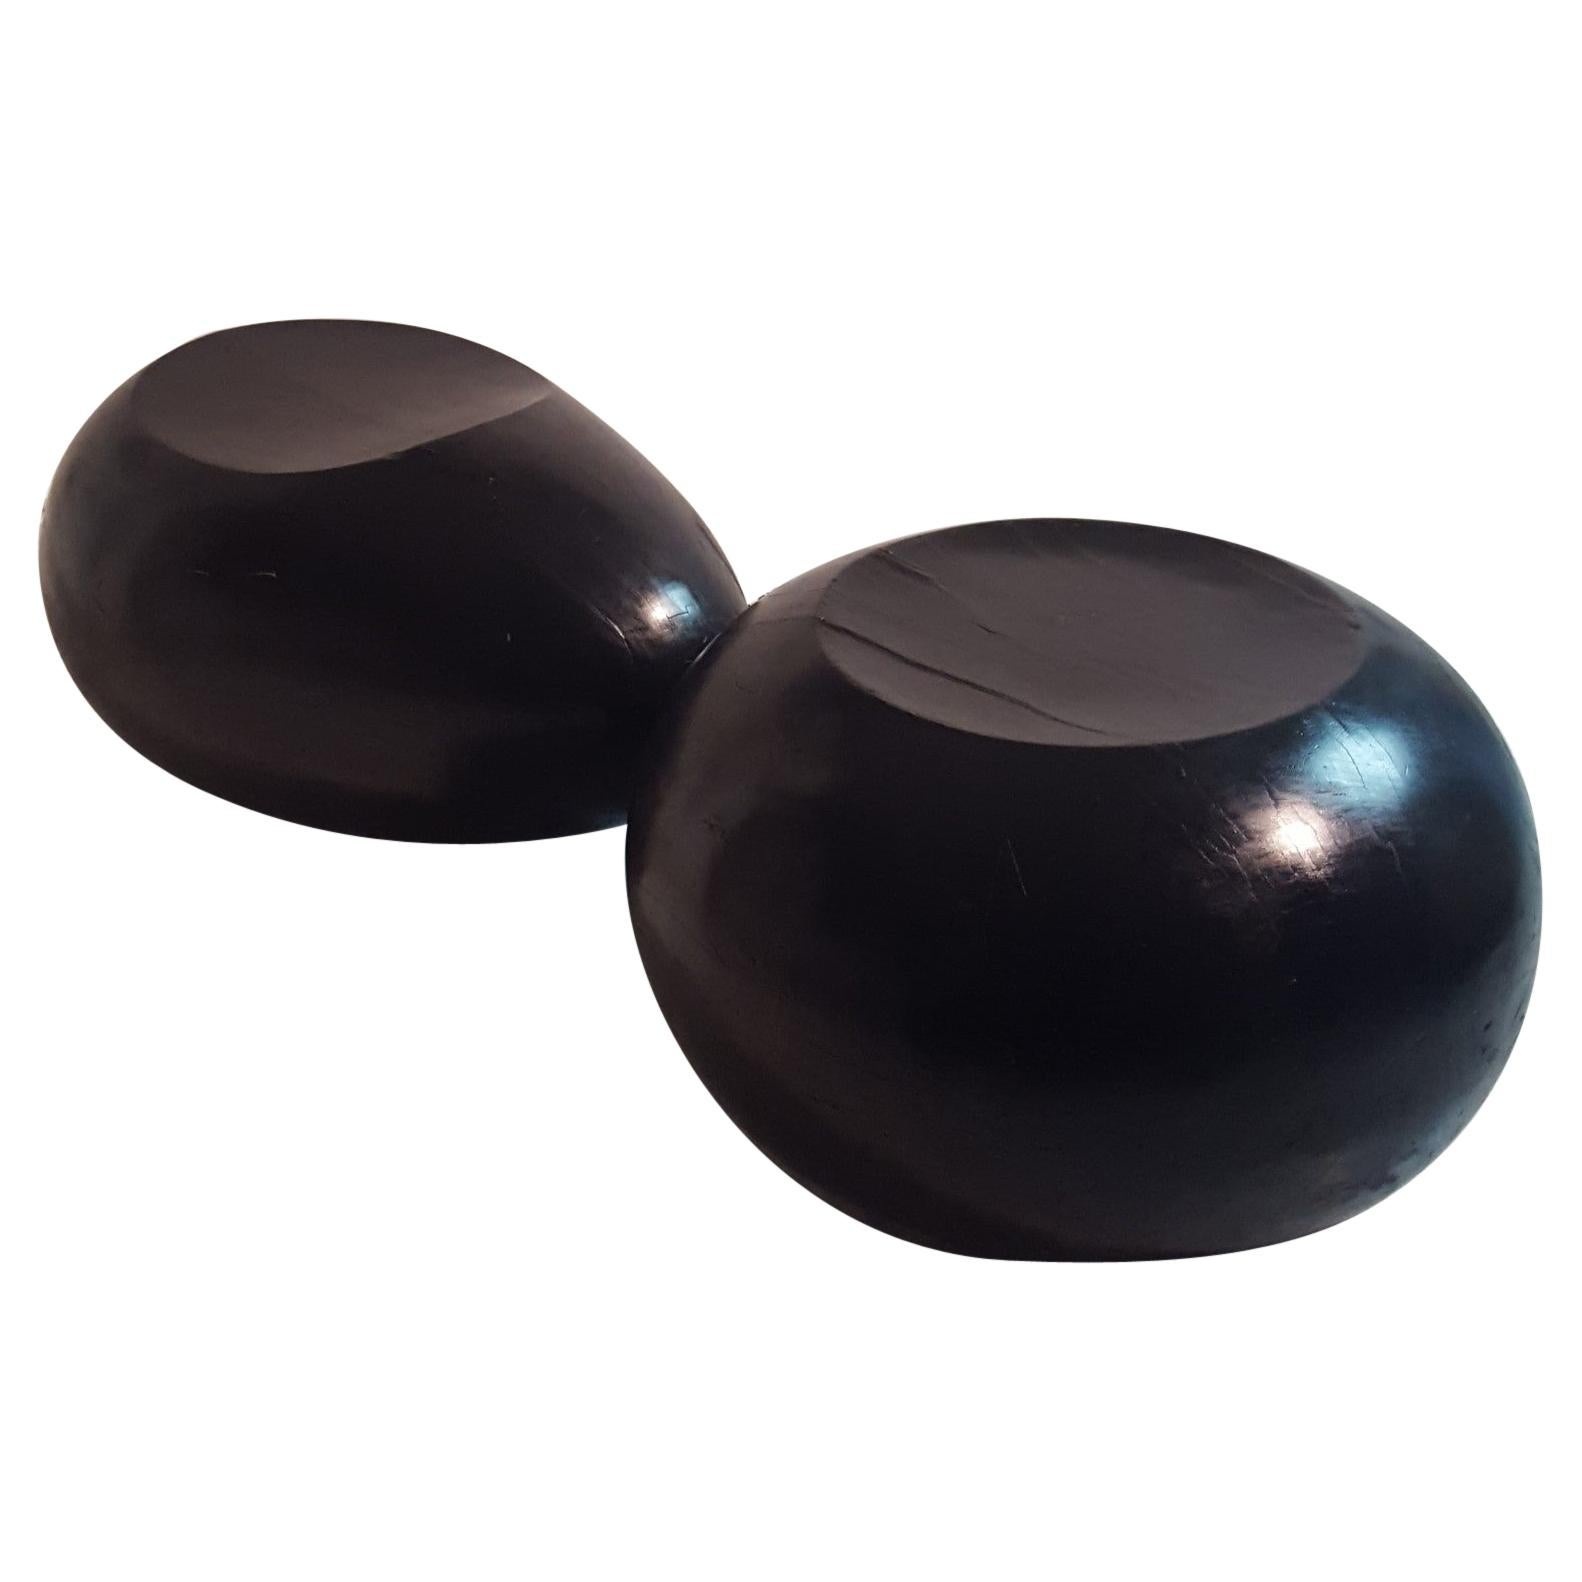 Midcentury Italian Pair of Solid Black Lacquered Wood Sculptural Seating, 1970s For Sale